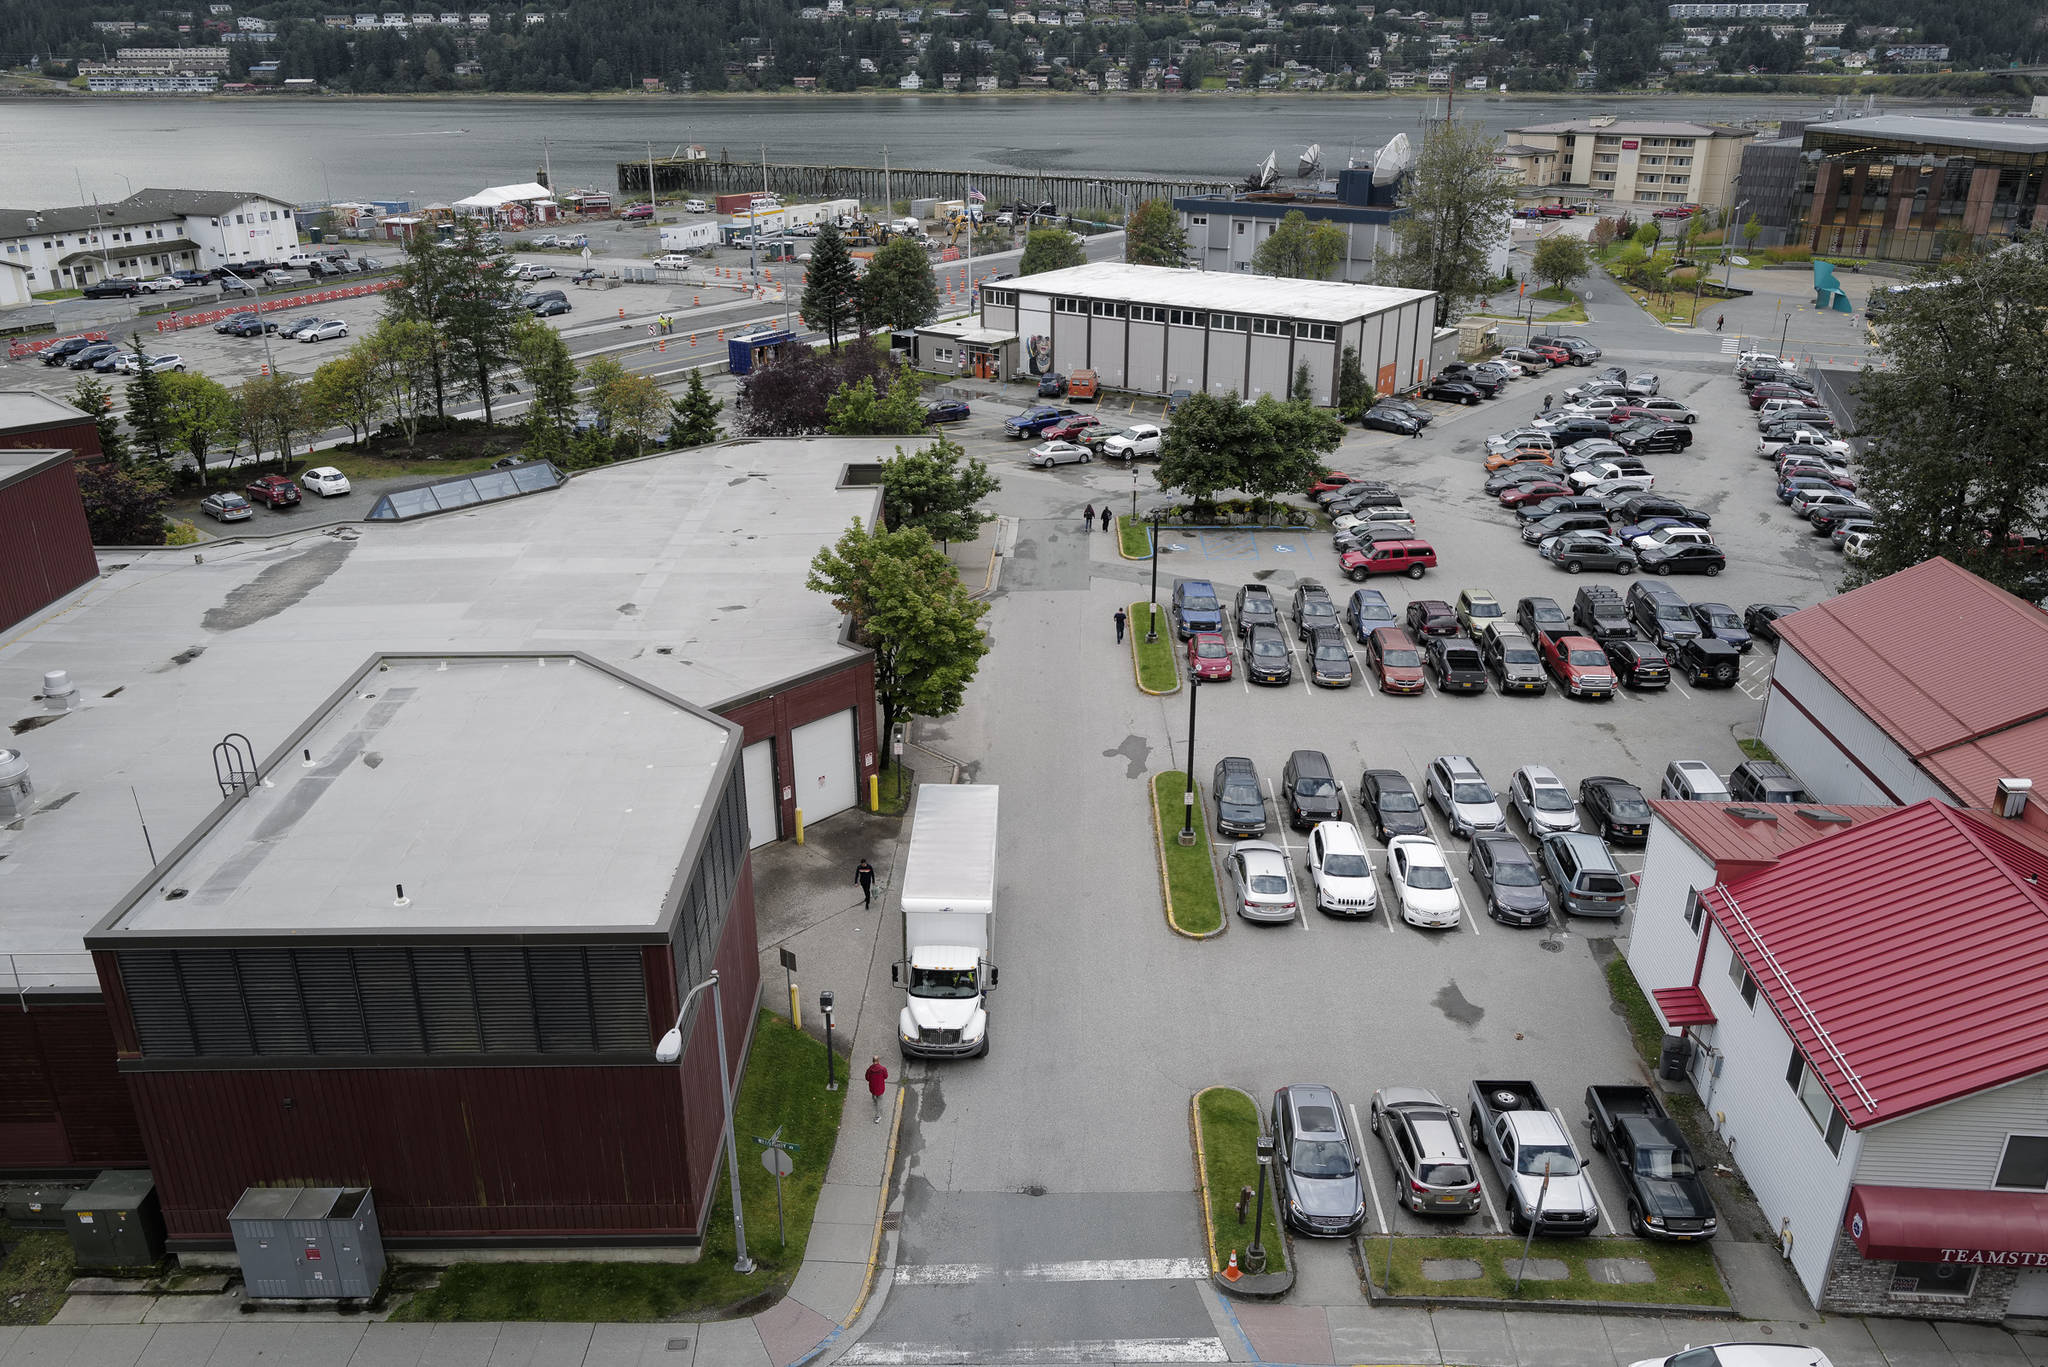 Centennial Hall, left and the Juneau Arts & Culture Center, center, seen in this August 2019 photo are providing shelter for homeless people in Juneau in light of the COVID-19 pandemic and recent spell of cold weather. (Michael Penn | Juneau Empire)